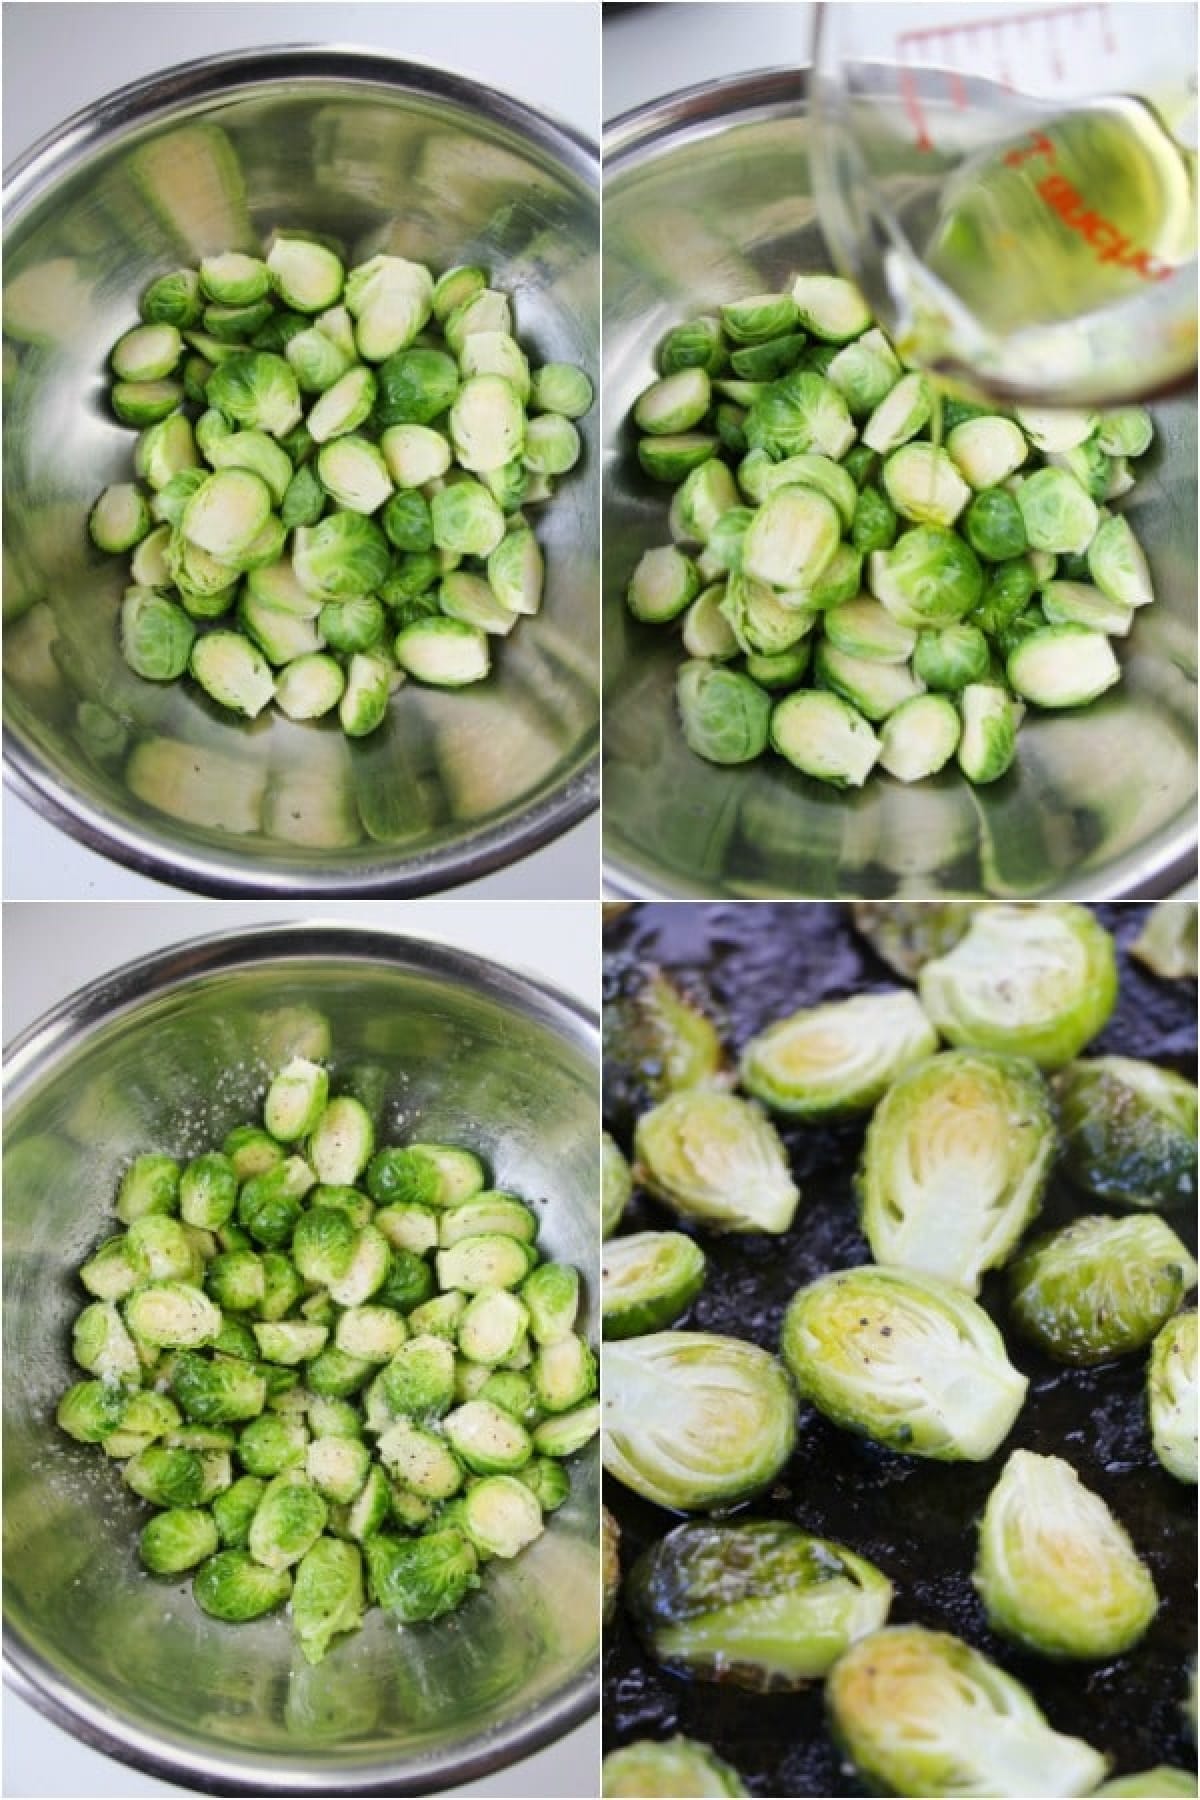 four photo collage showing how to make ginger lime Brussels sprouts: toss in a bowl, add oil and seasonings, pan fry.